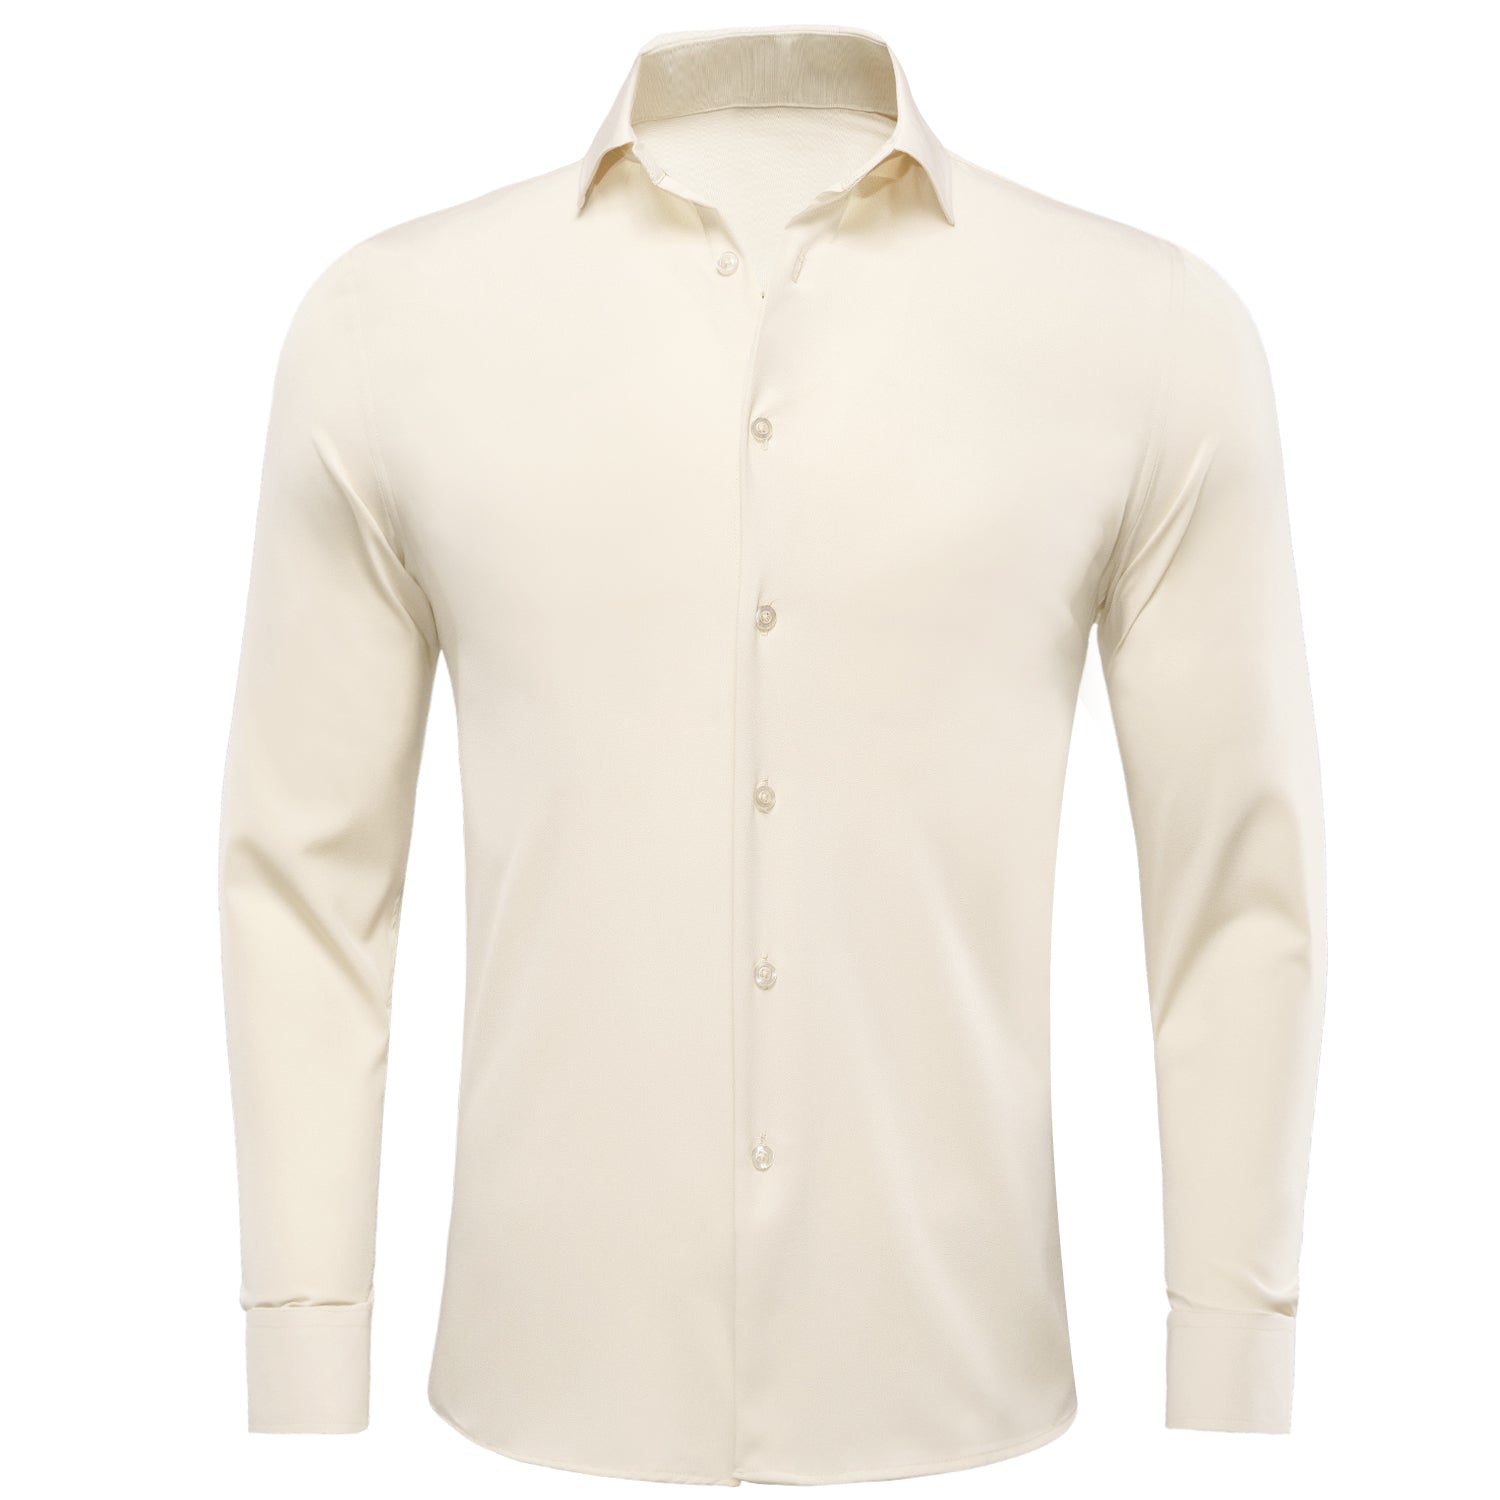 New Milk White Solid Stretch Men's Long Sleeve Shirt